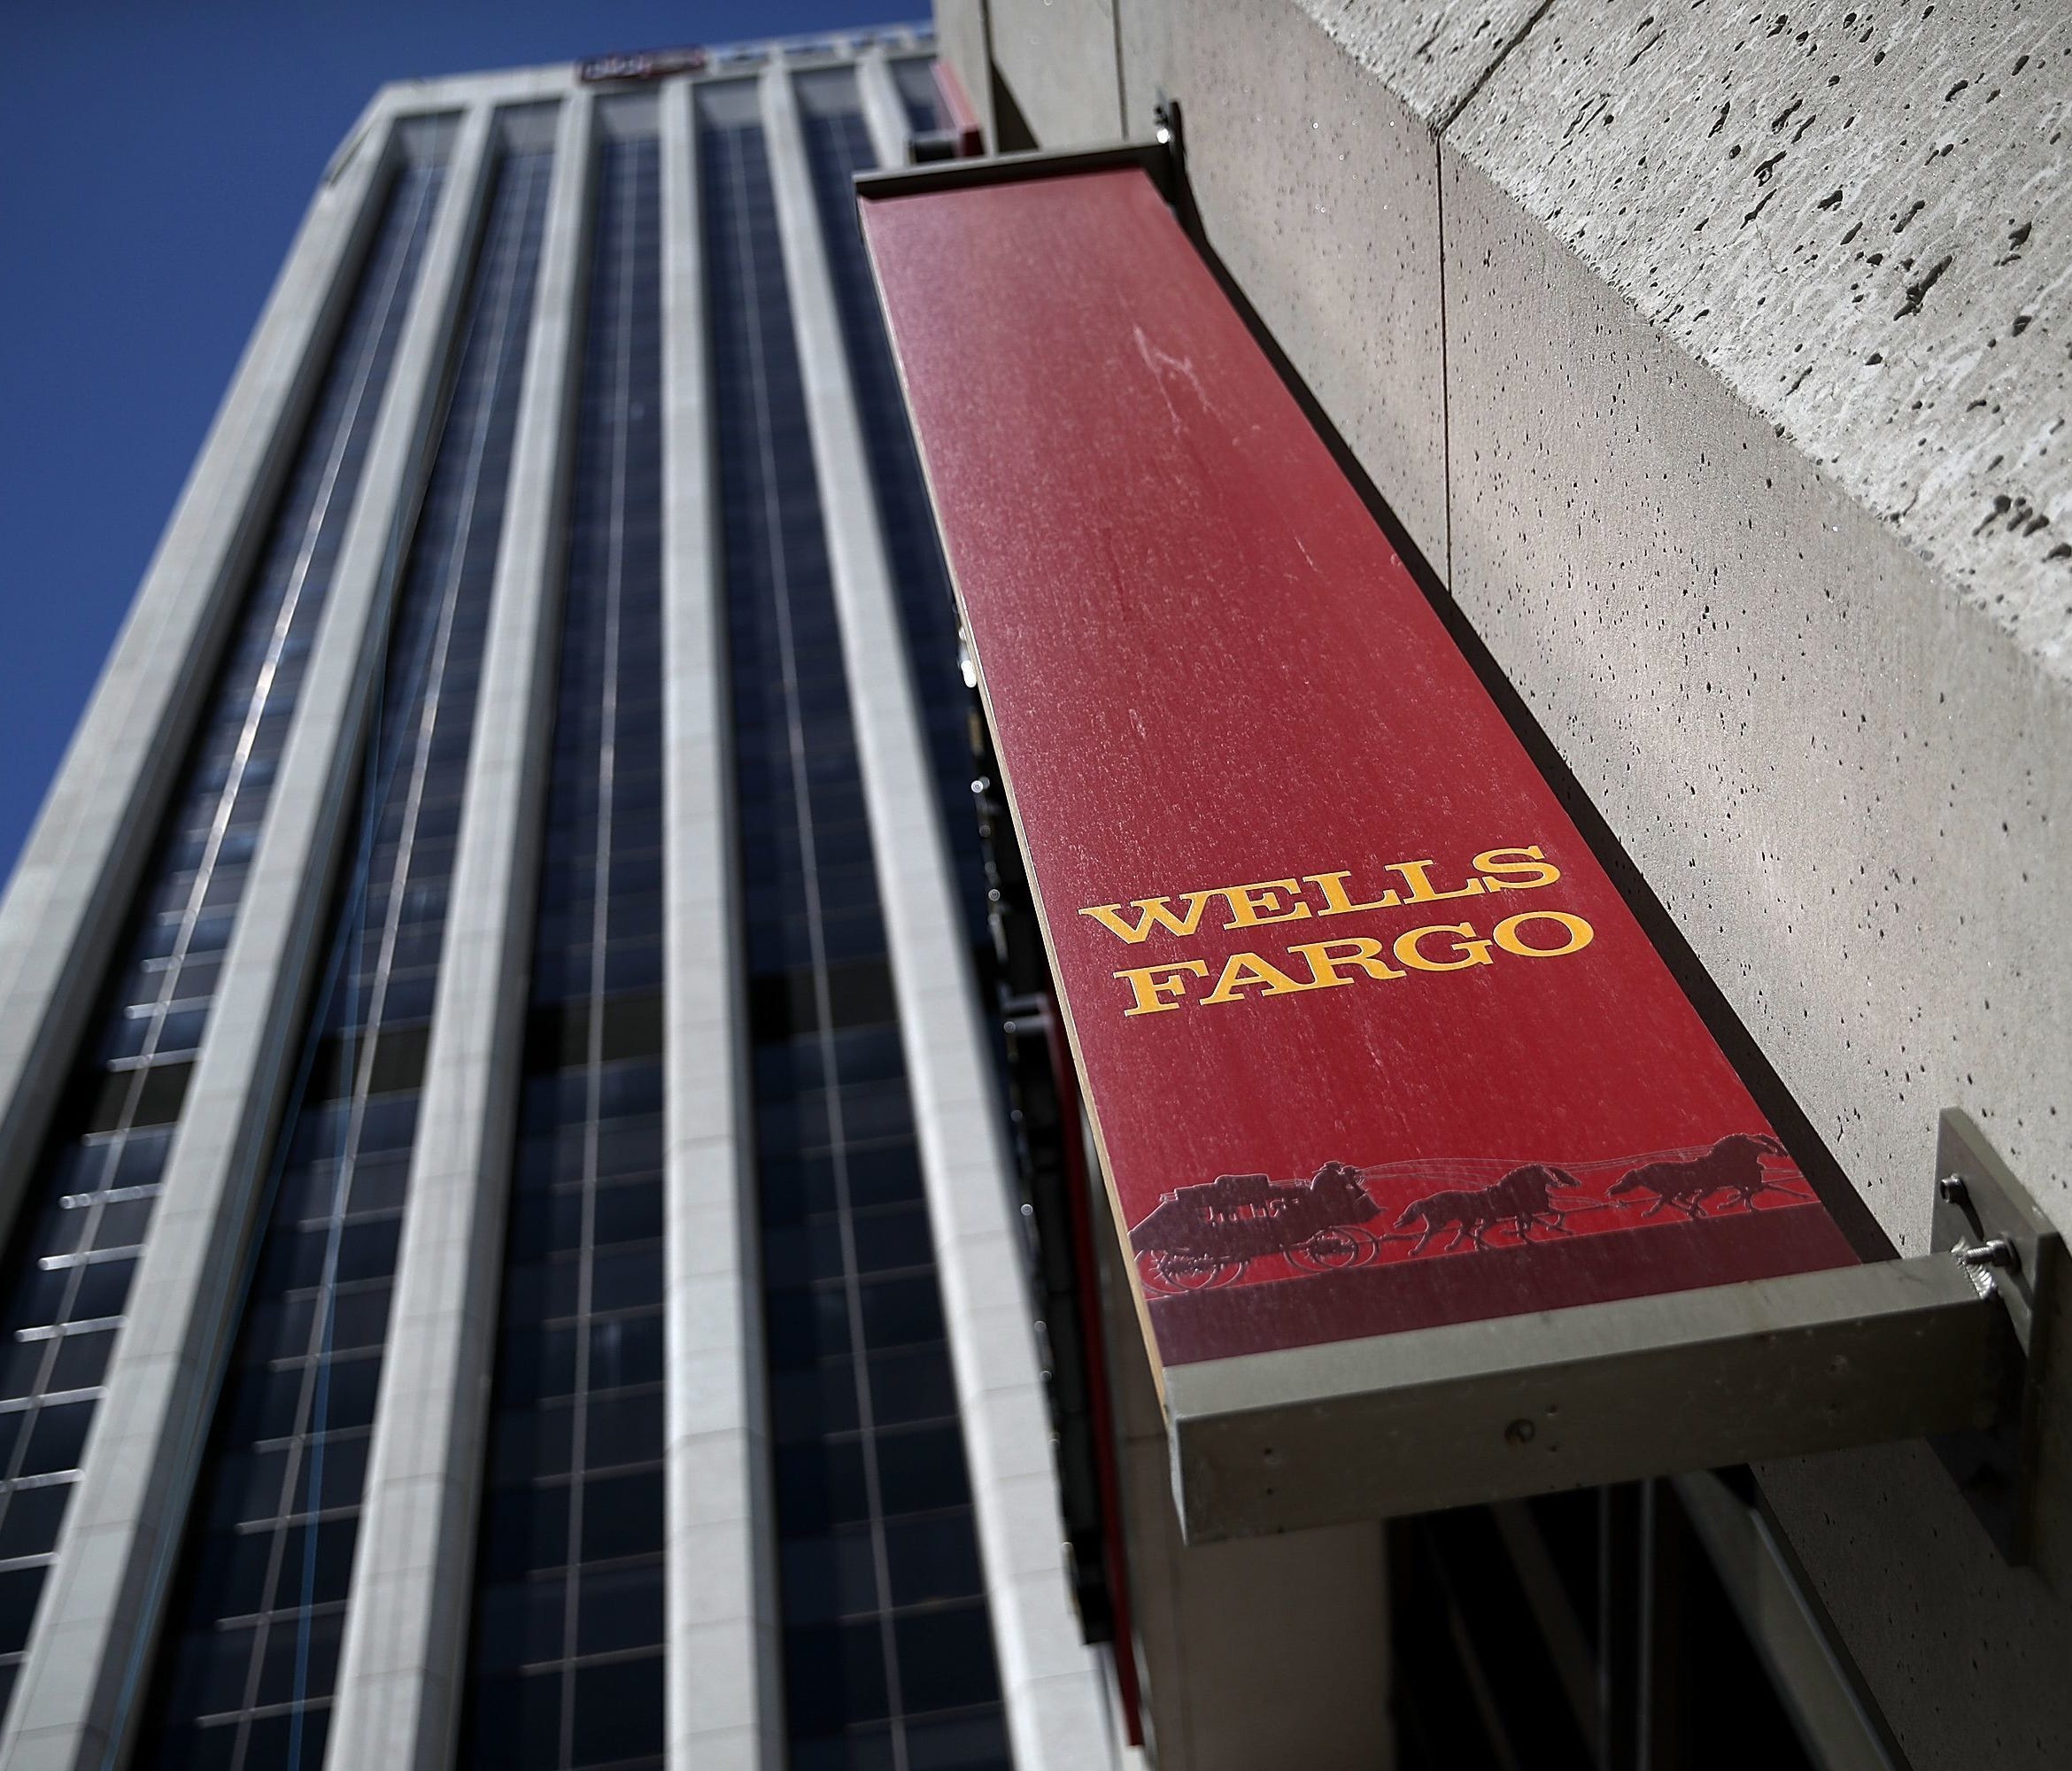 File photo taken in 2017 shows a Wells Fargo sign outside one of the bank's branches in San Francisco, California